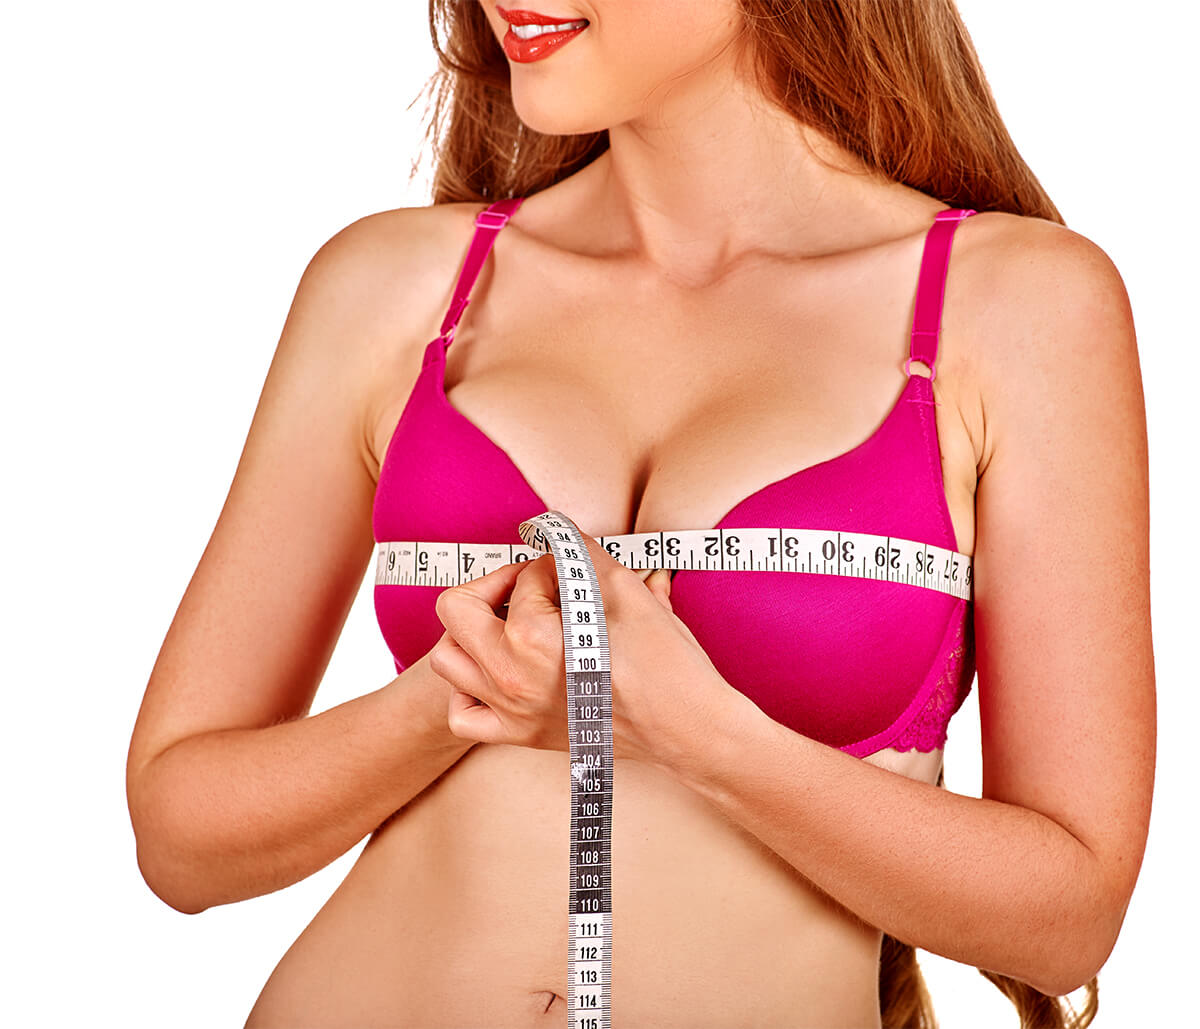 Natural Looking Breast Augmentation, Implant